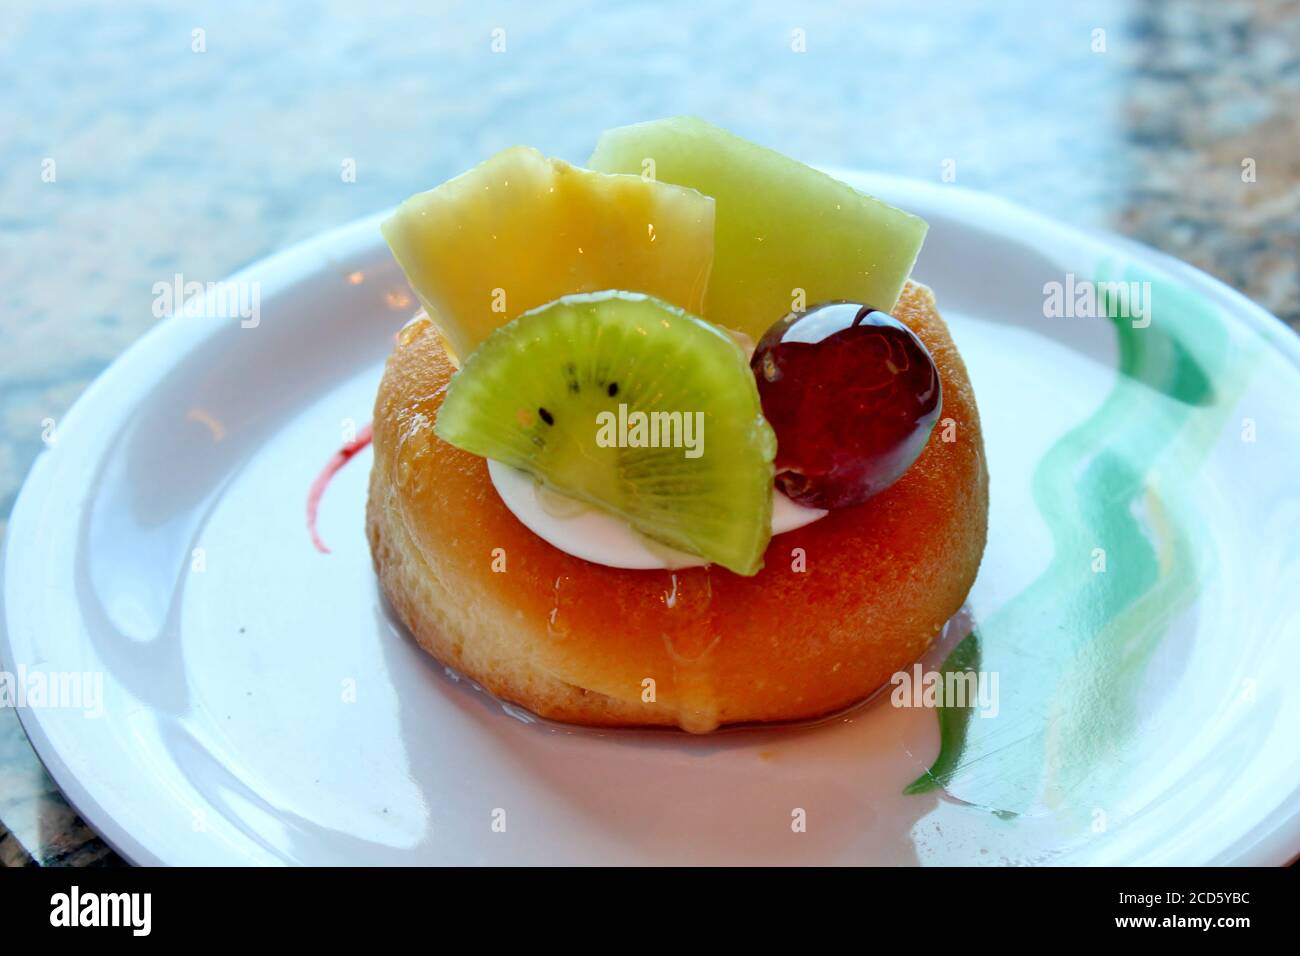 Cake dessert with kiwi, pineapple and grapes Stock Photo